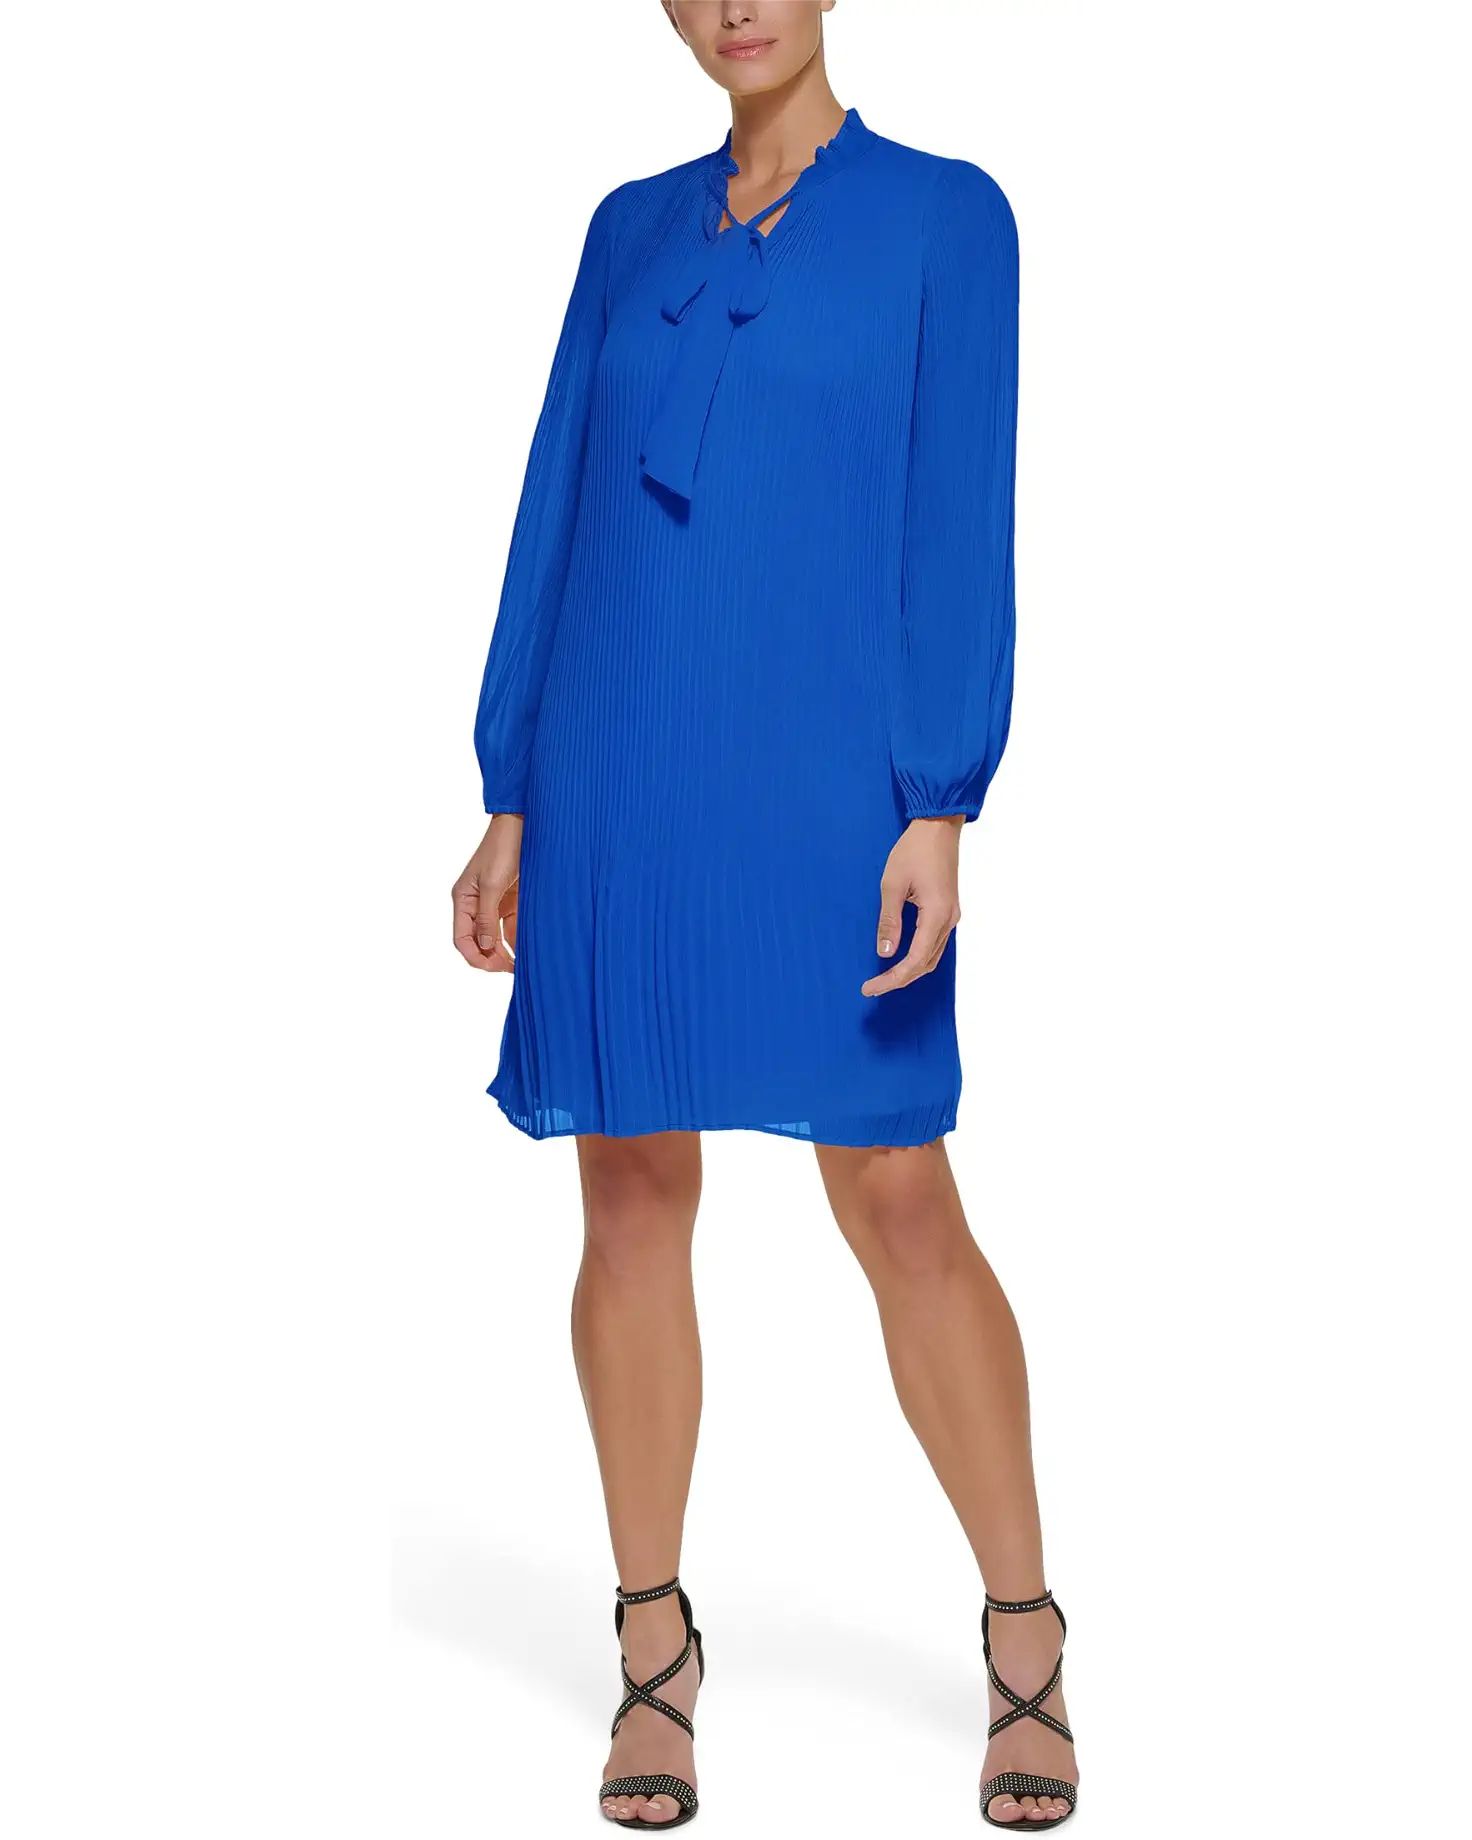 DKNY Long Sleeve Pleated Shift Dress with Neck Tie | Zappos